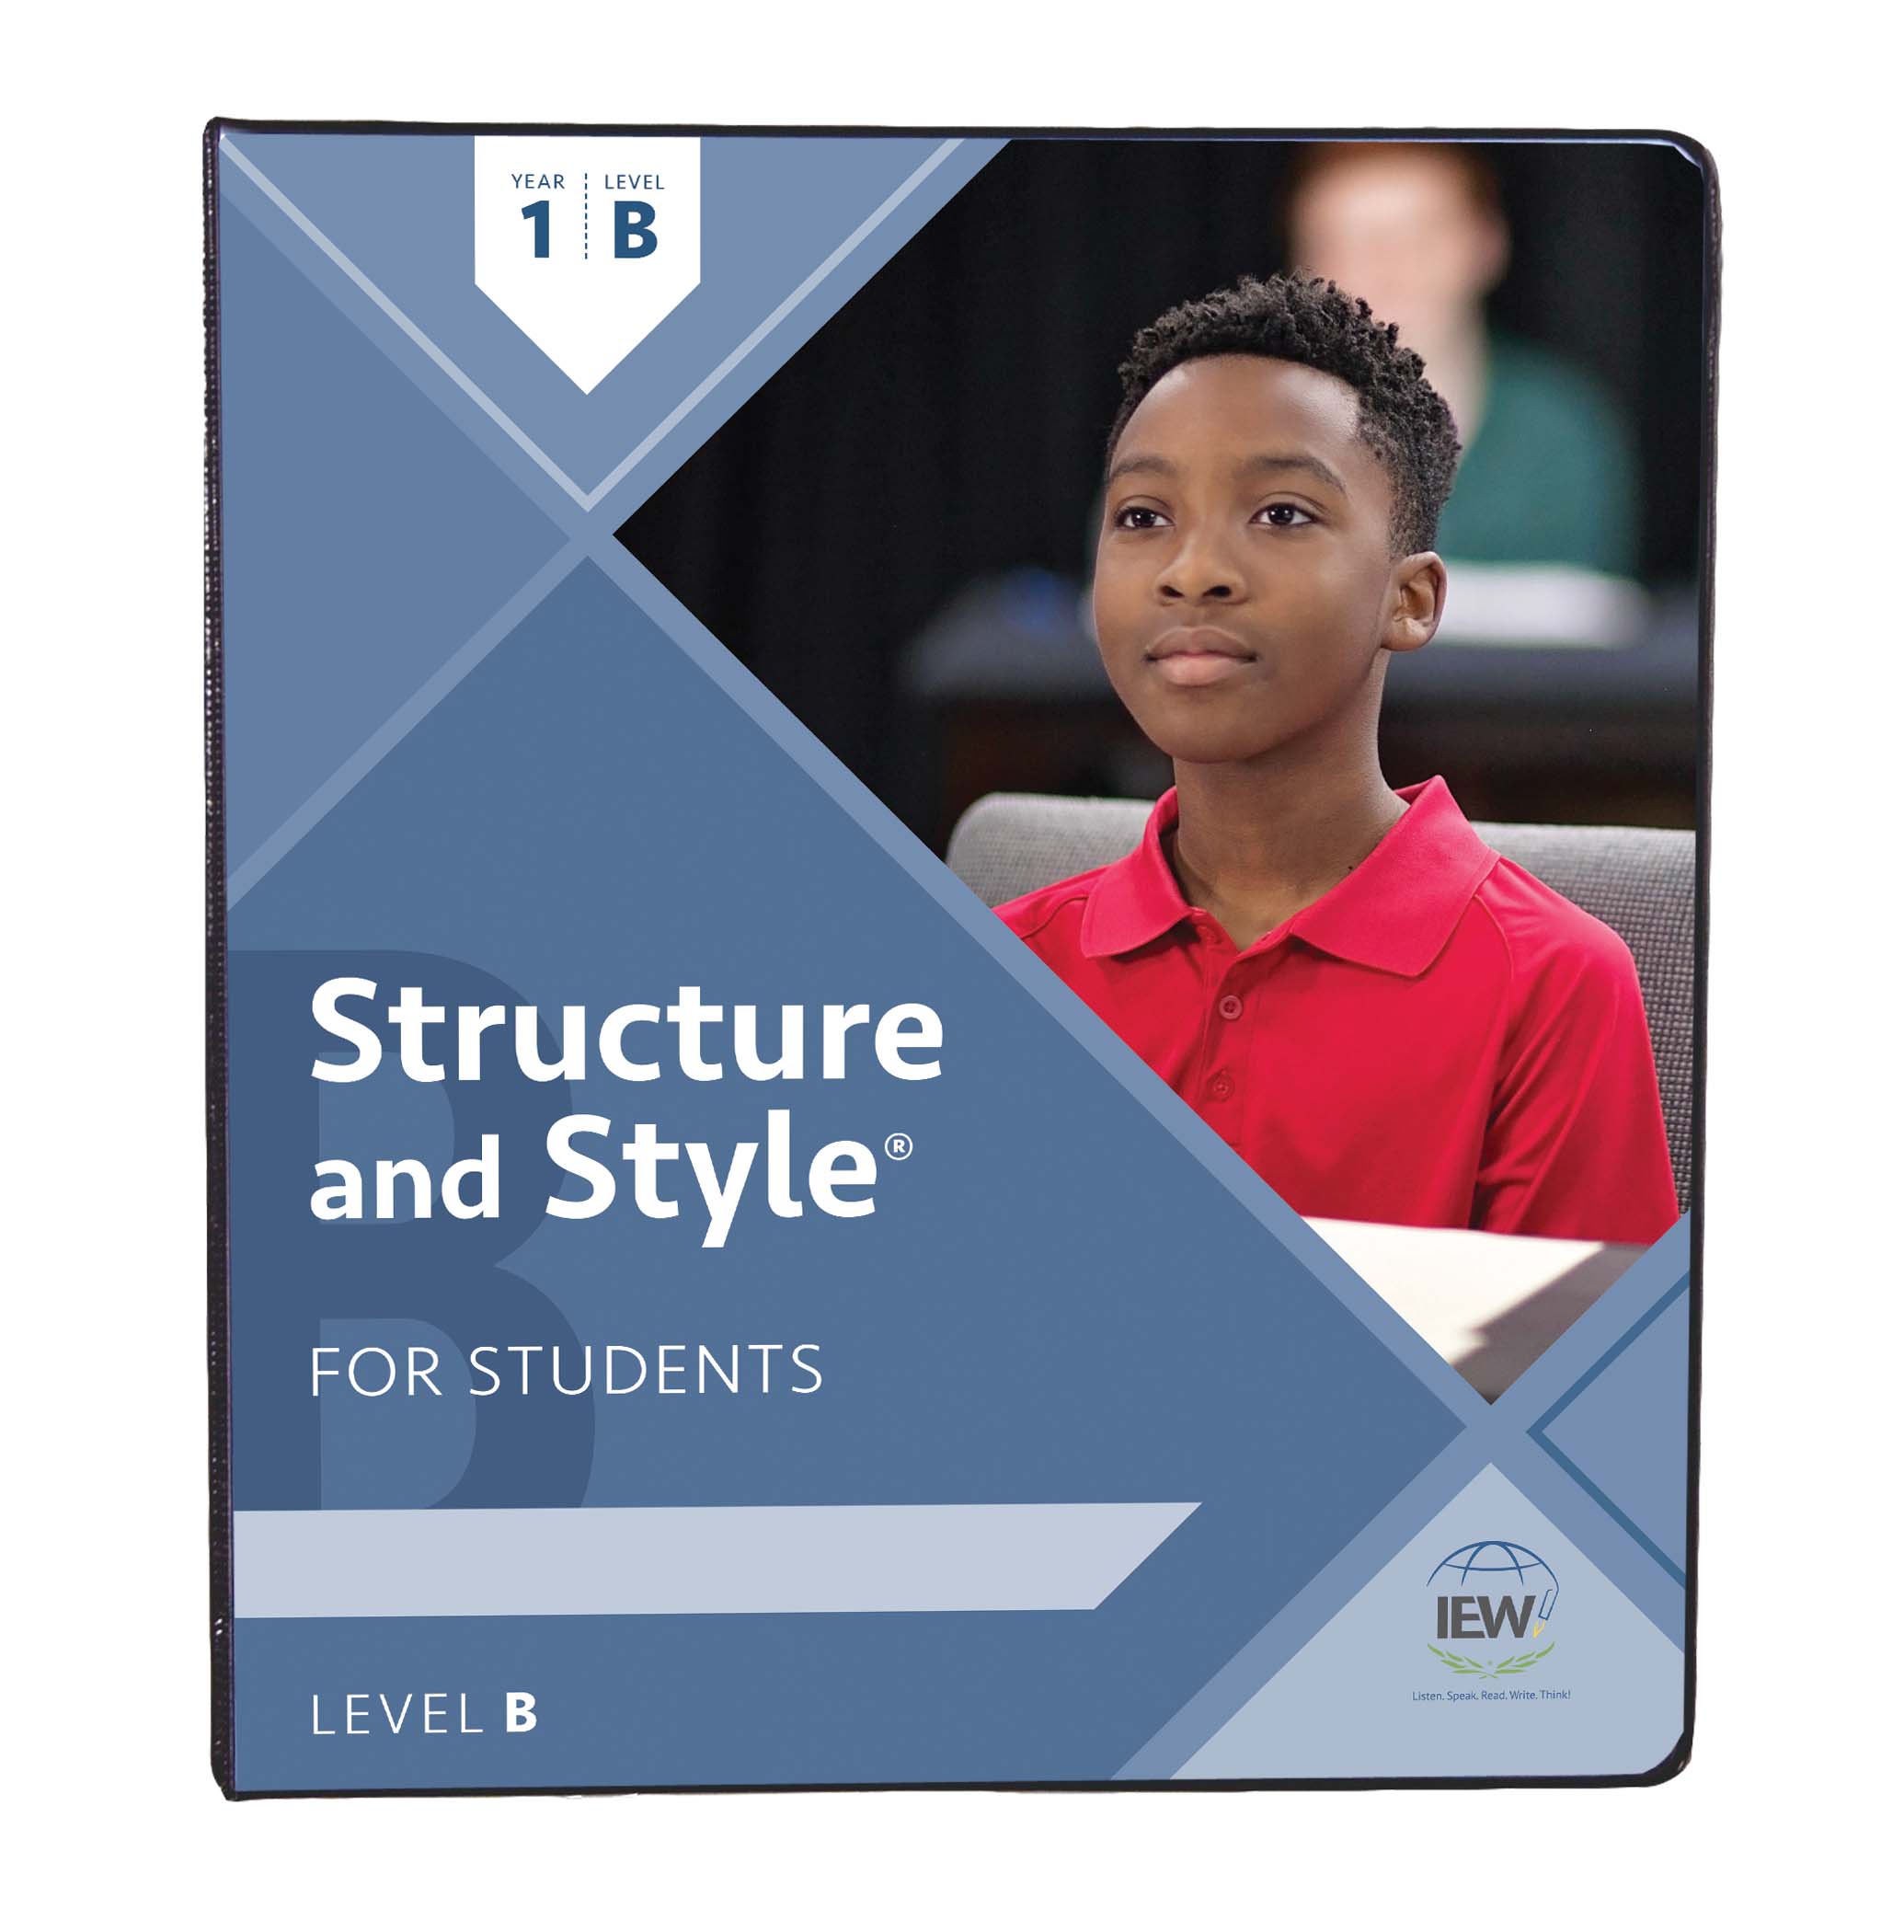 Structure and Style for Students: Year 1 Level B [Binder]